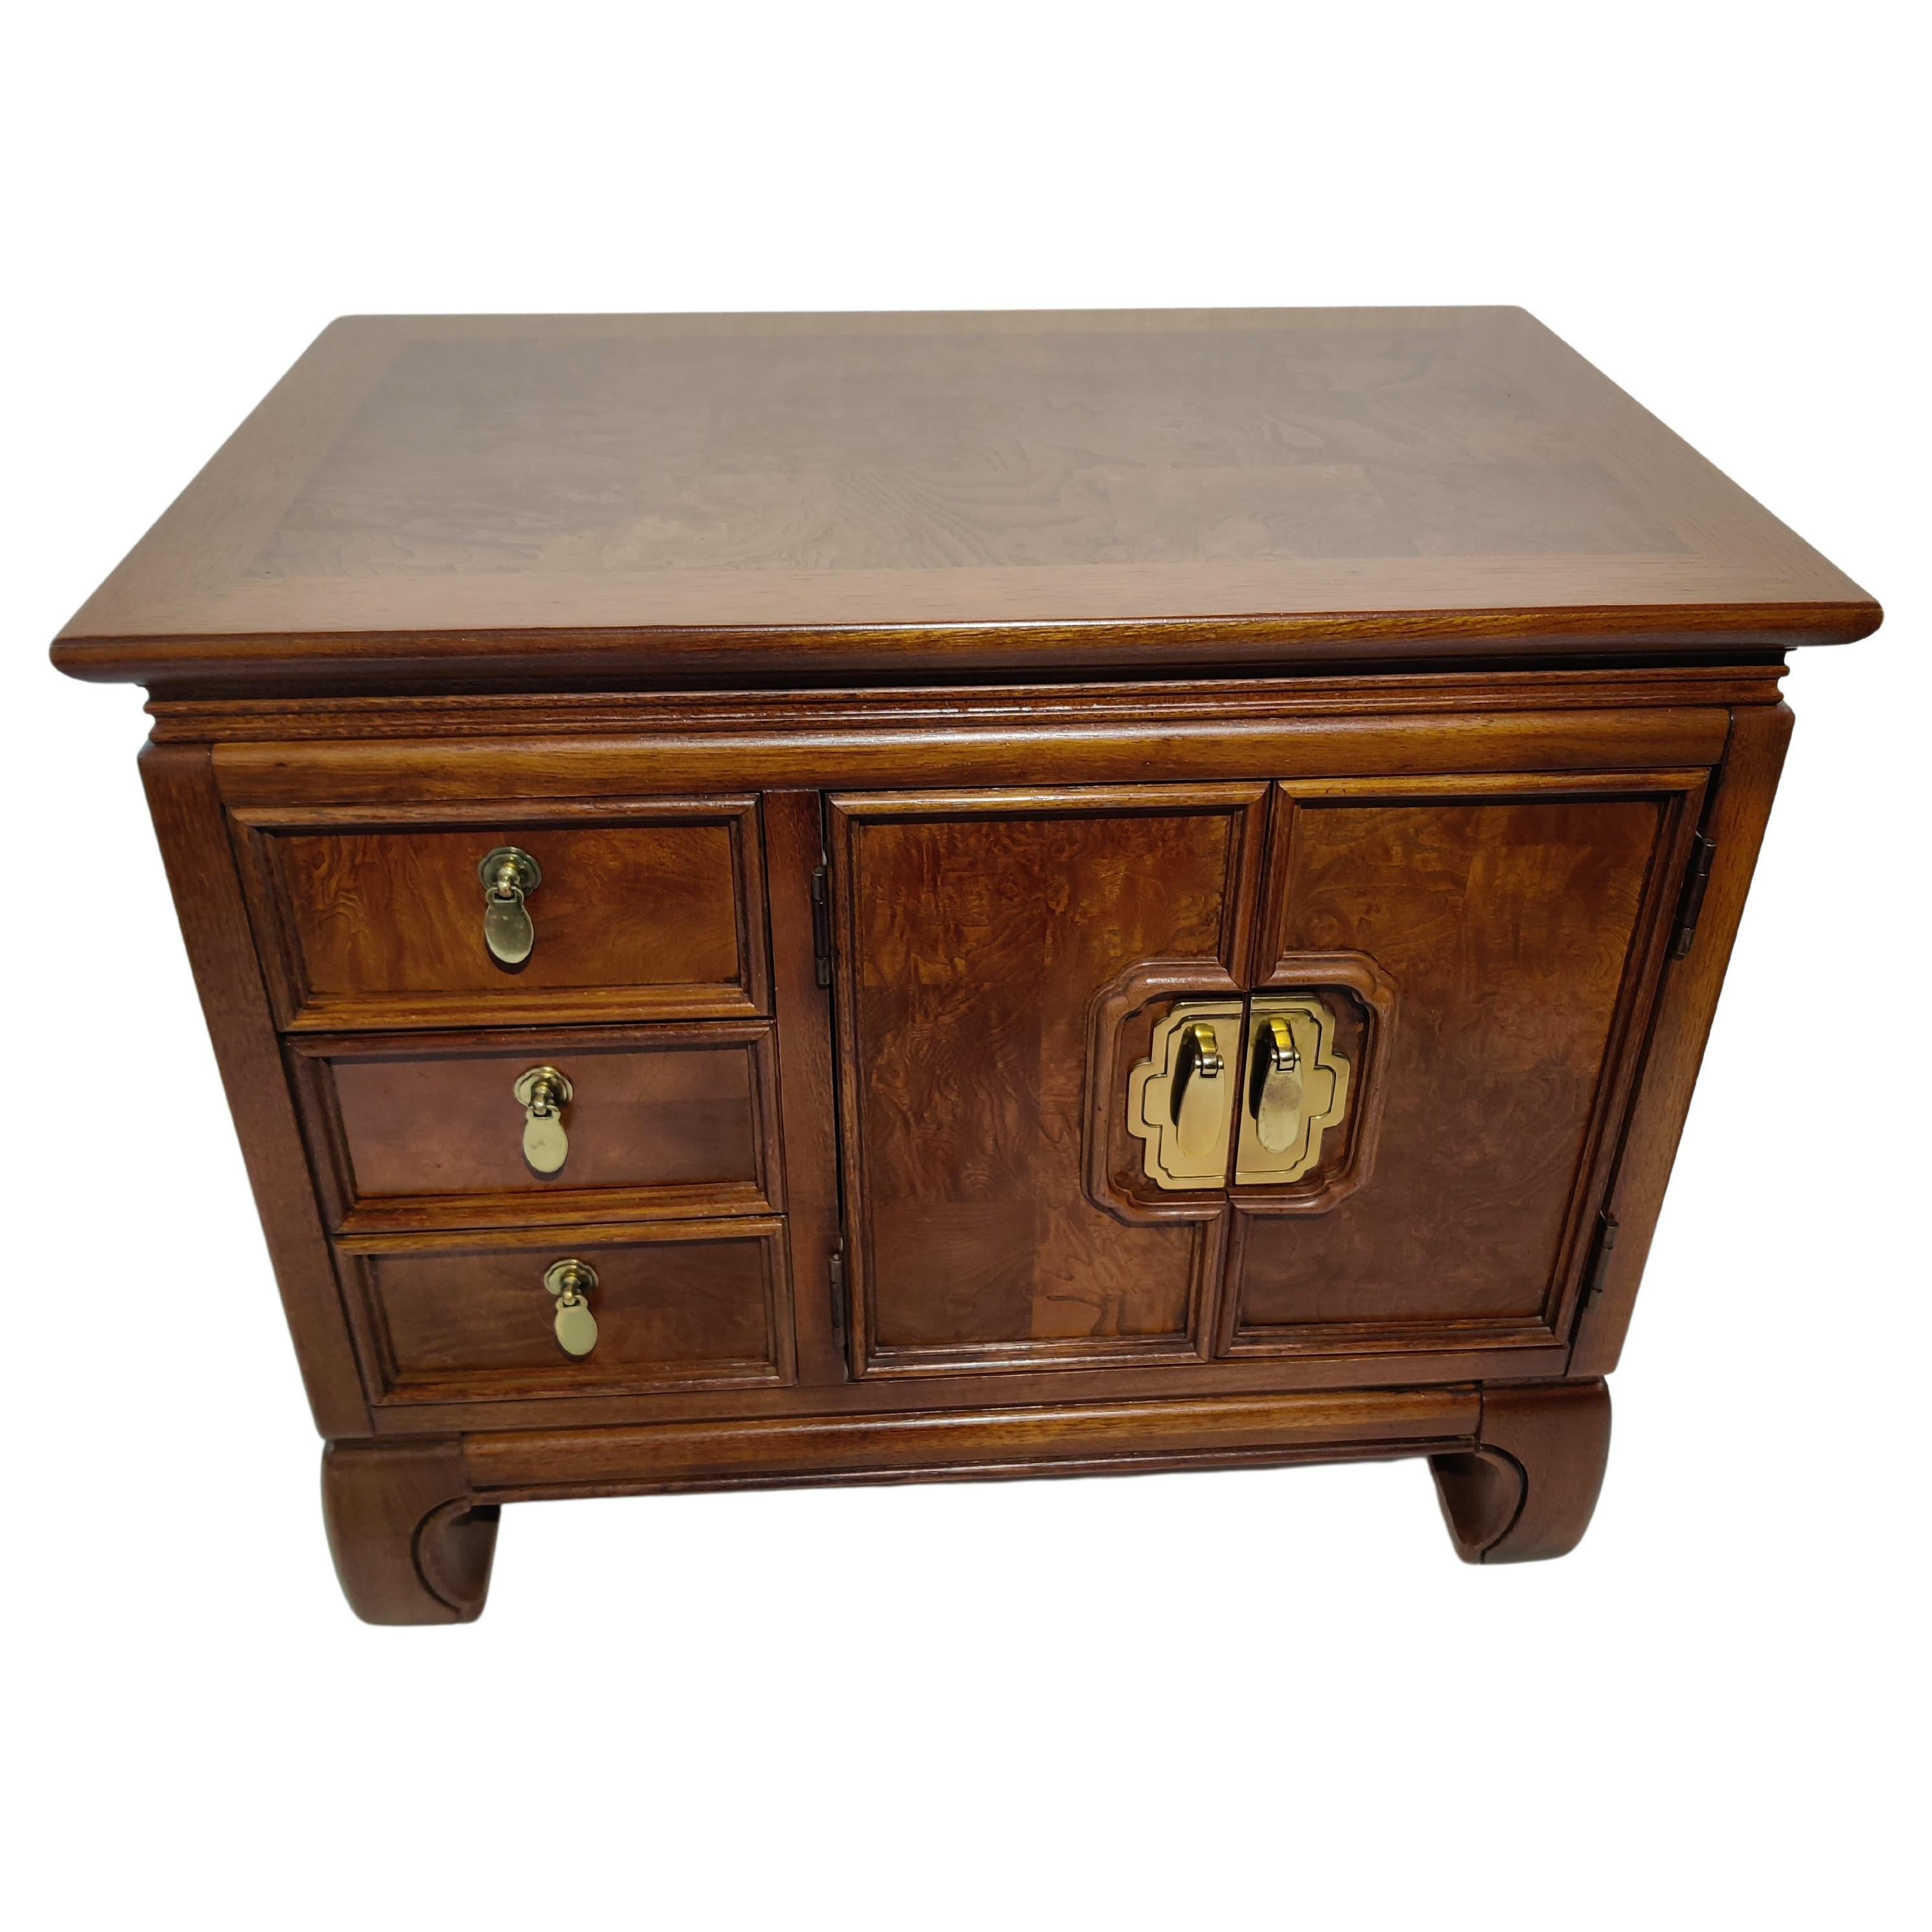 Thomasville Mystique Chinoiserie Solid Cherry End Table / Nightstand